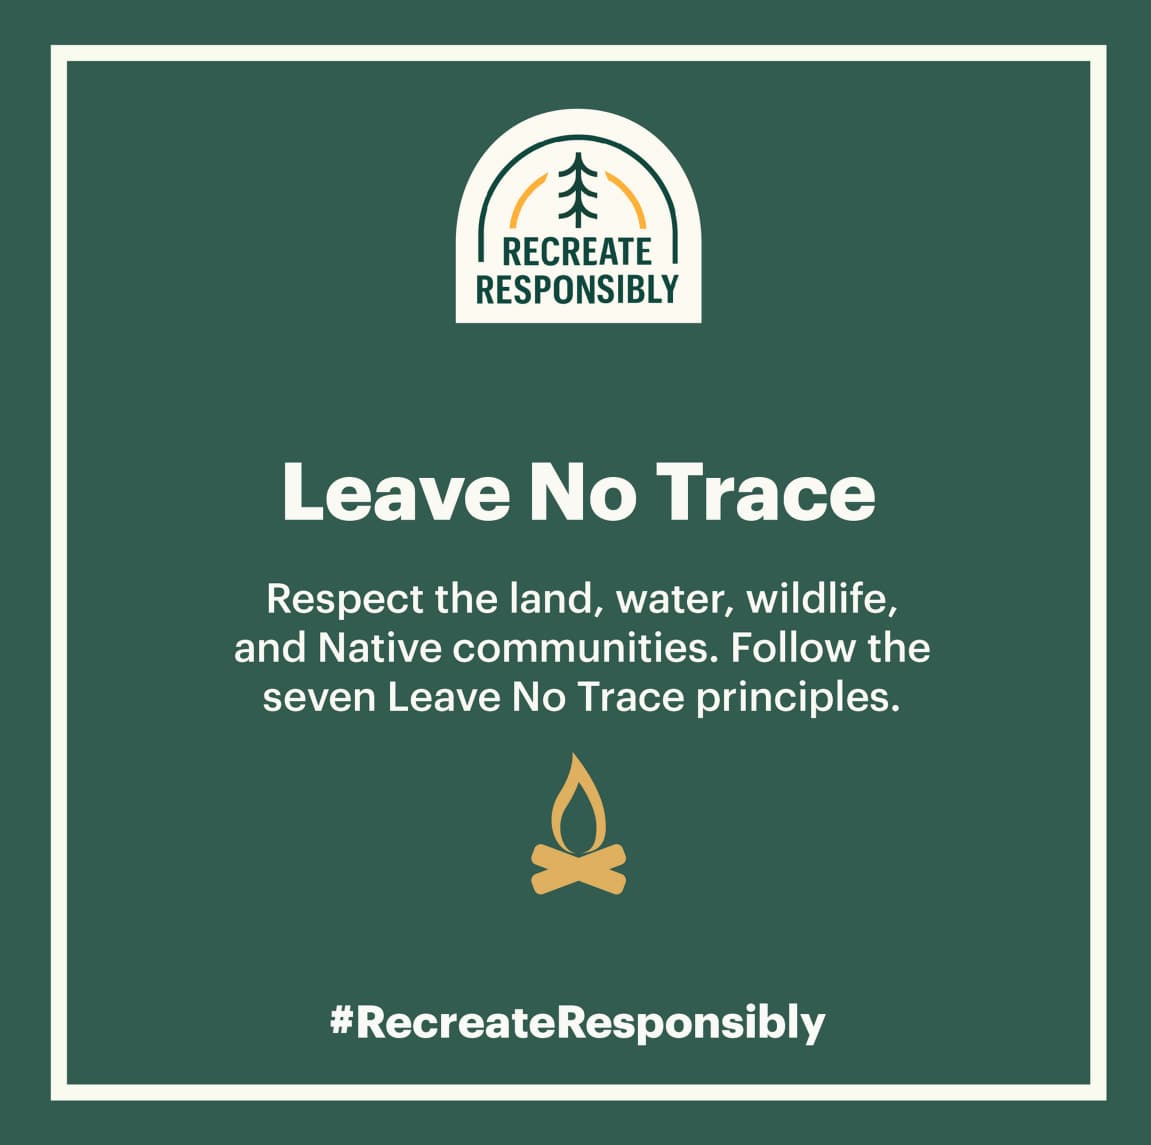 an infographic with the words leave no trace, respect the land, water, wildlife, and native communities